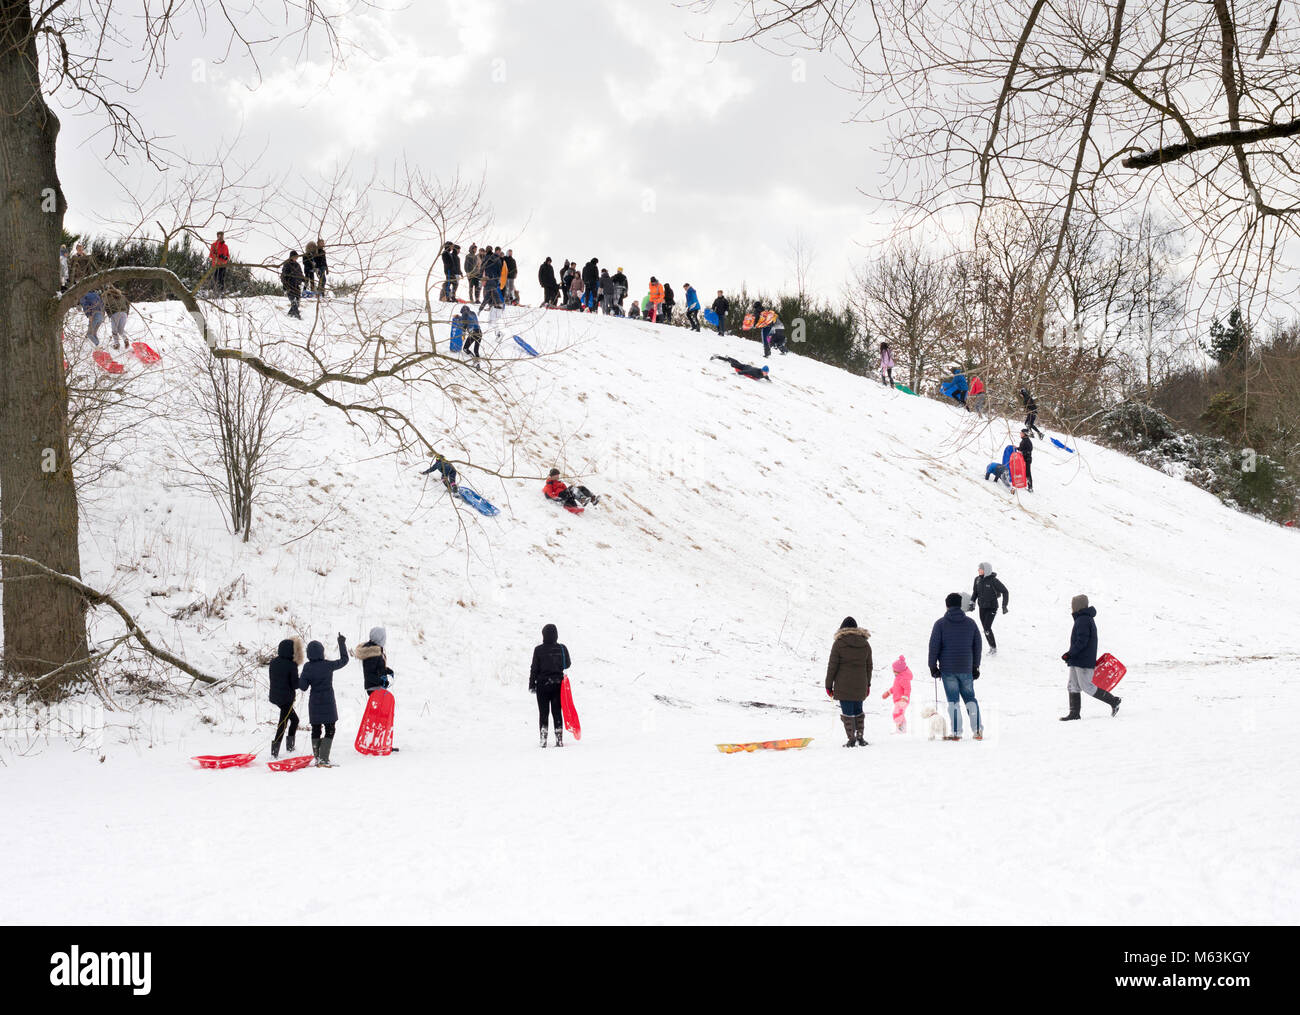 Washington, UK. 28th February 2018. UK Weather: Heavy snow falls have resulted in the closure of schools and children have been able to enjoy sledging down Worm Hill. Washington, Tyne and Wear. England, (c) Washington Imaging/Alamy Live News Stock Photo